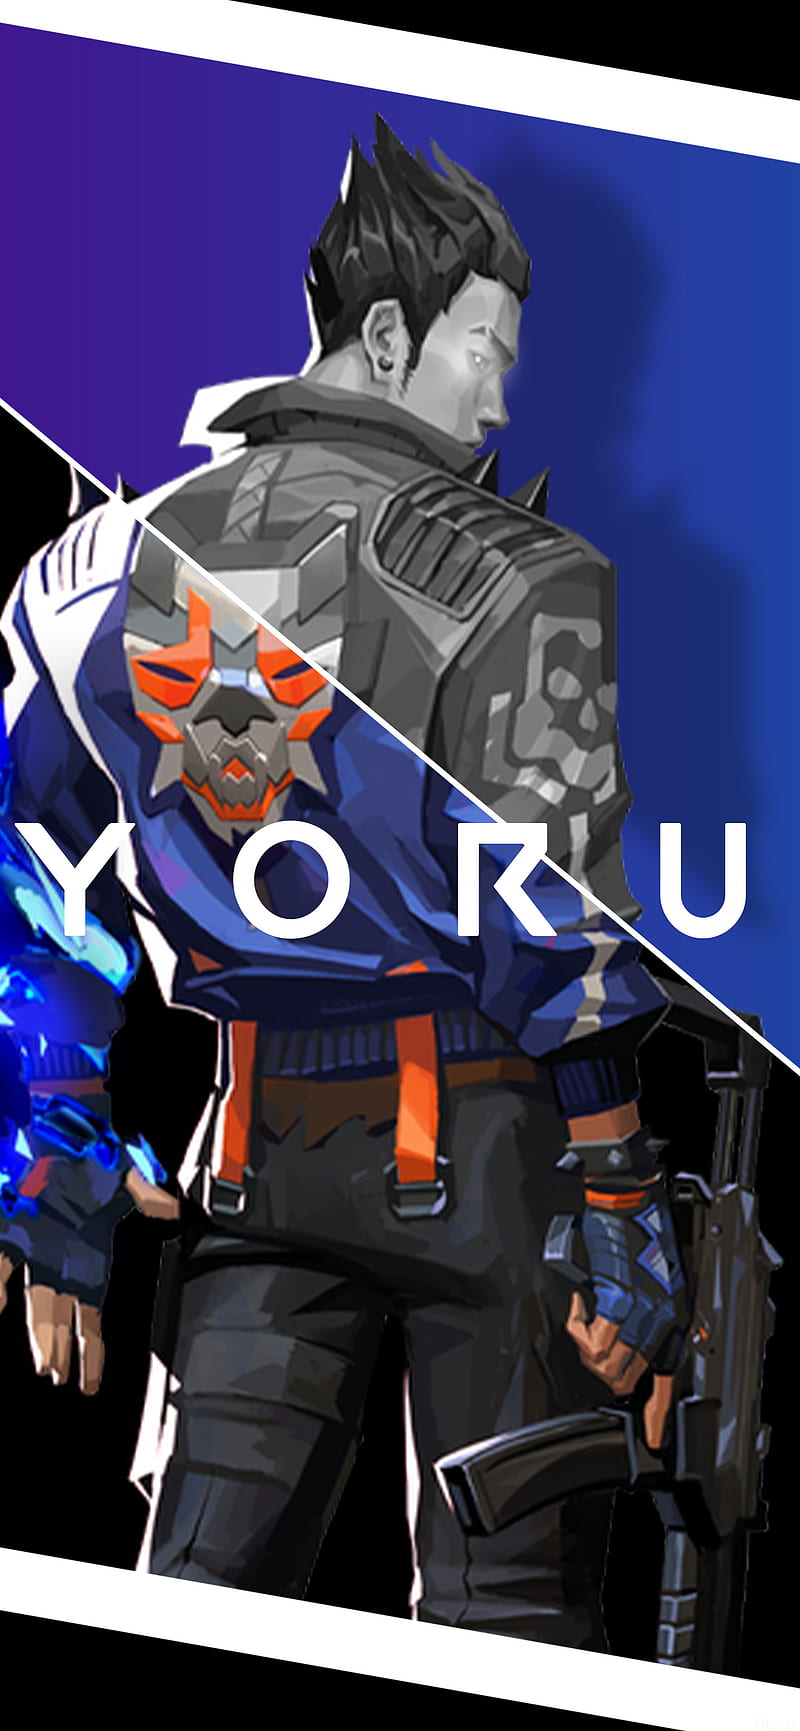 Yoru Valorant 4K Wallpaper HD Games 4K Wallpapers Images and Background   Wallpapers Den